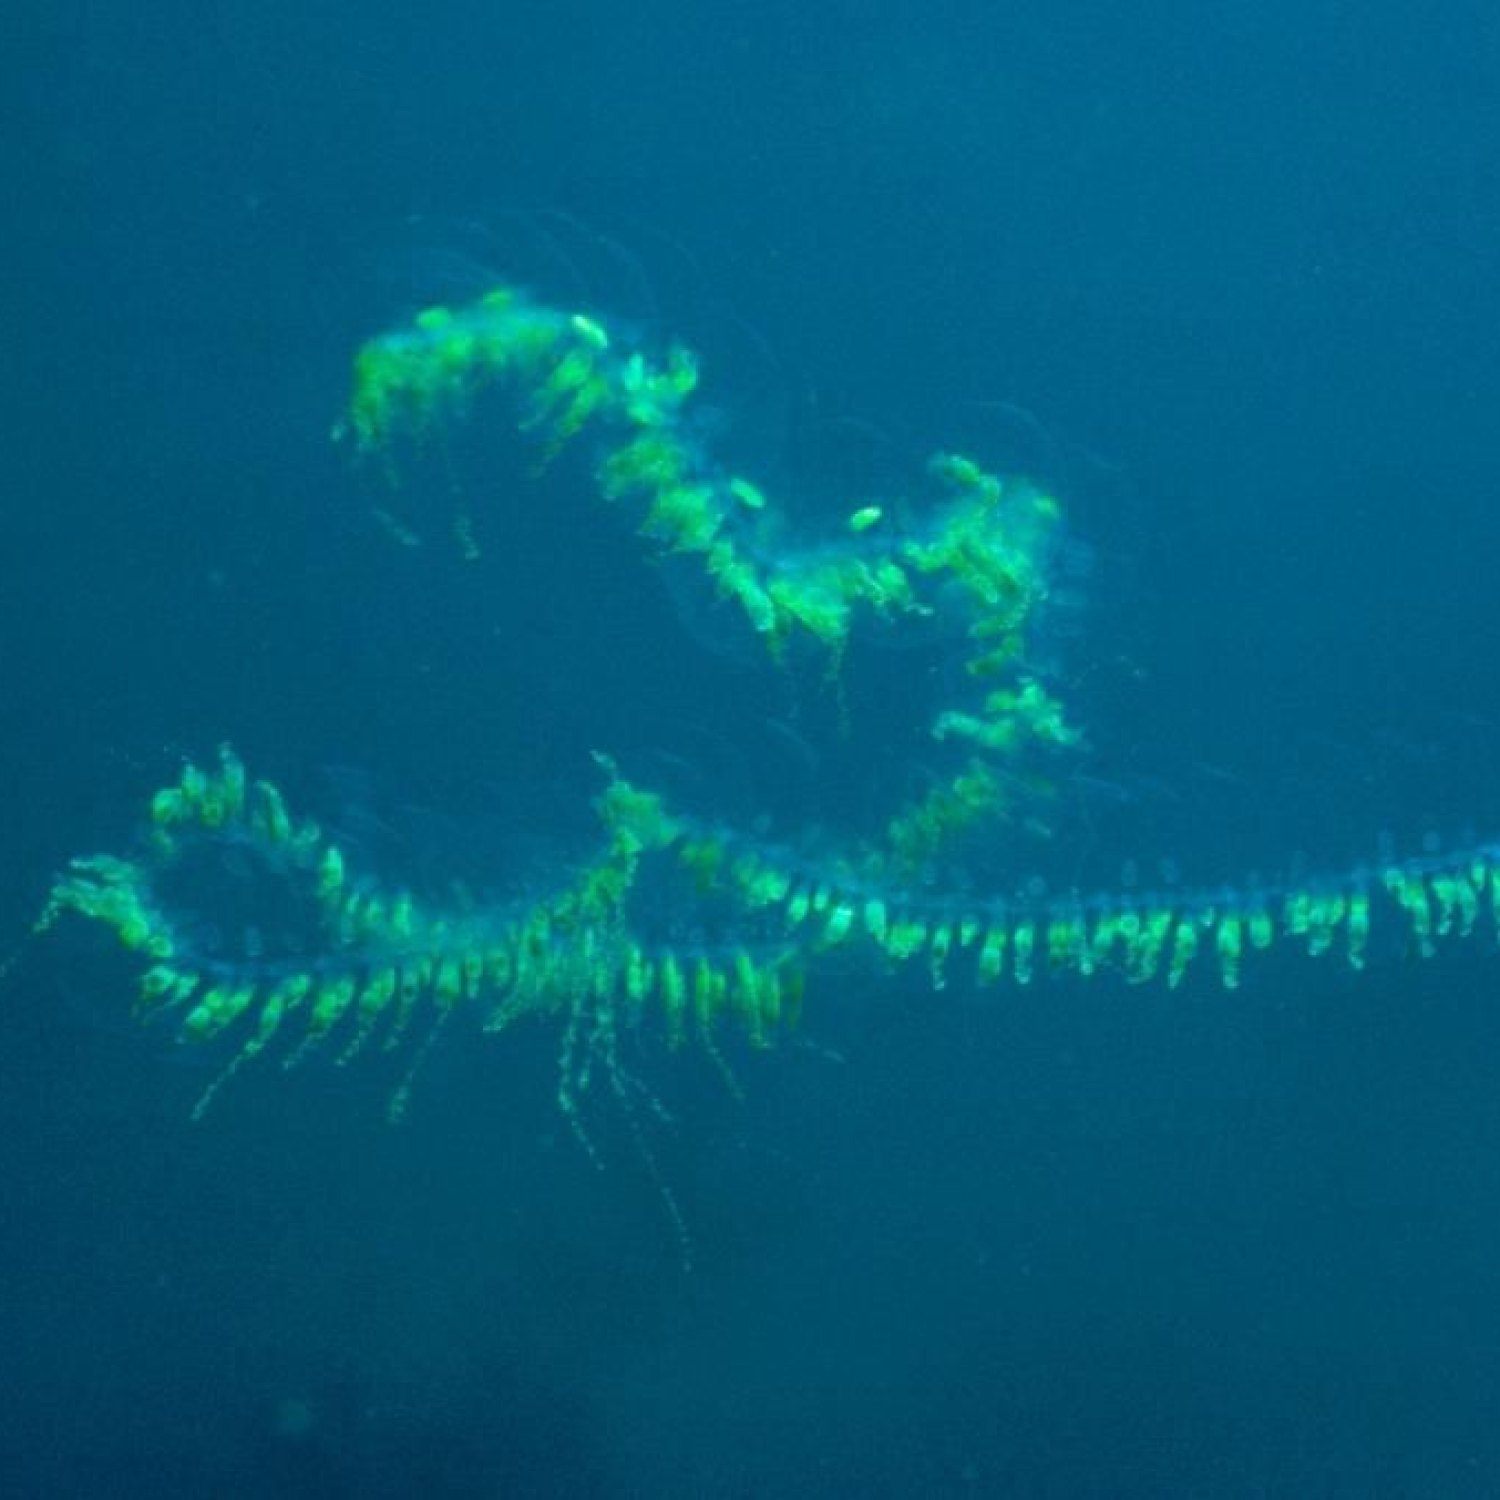 Giant Siphonophore